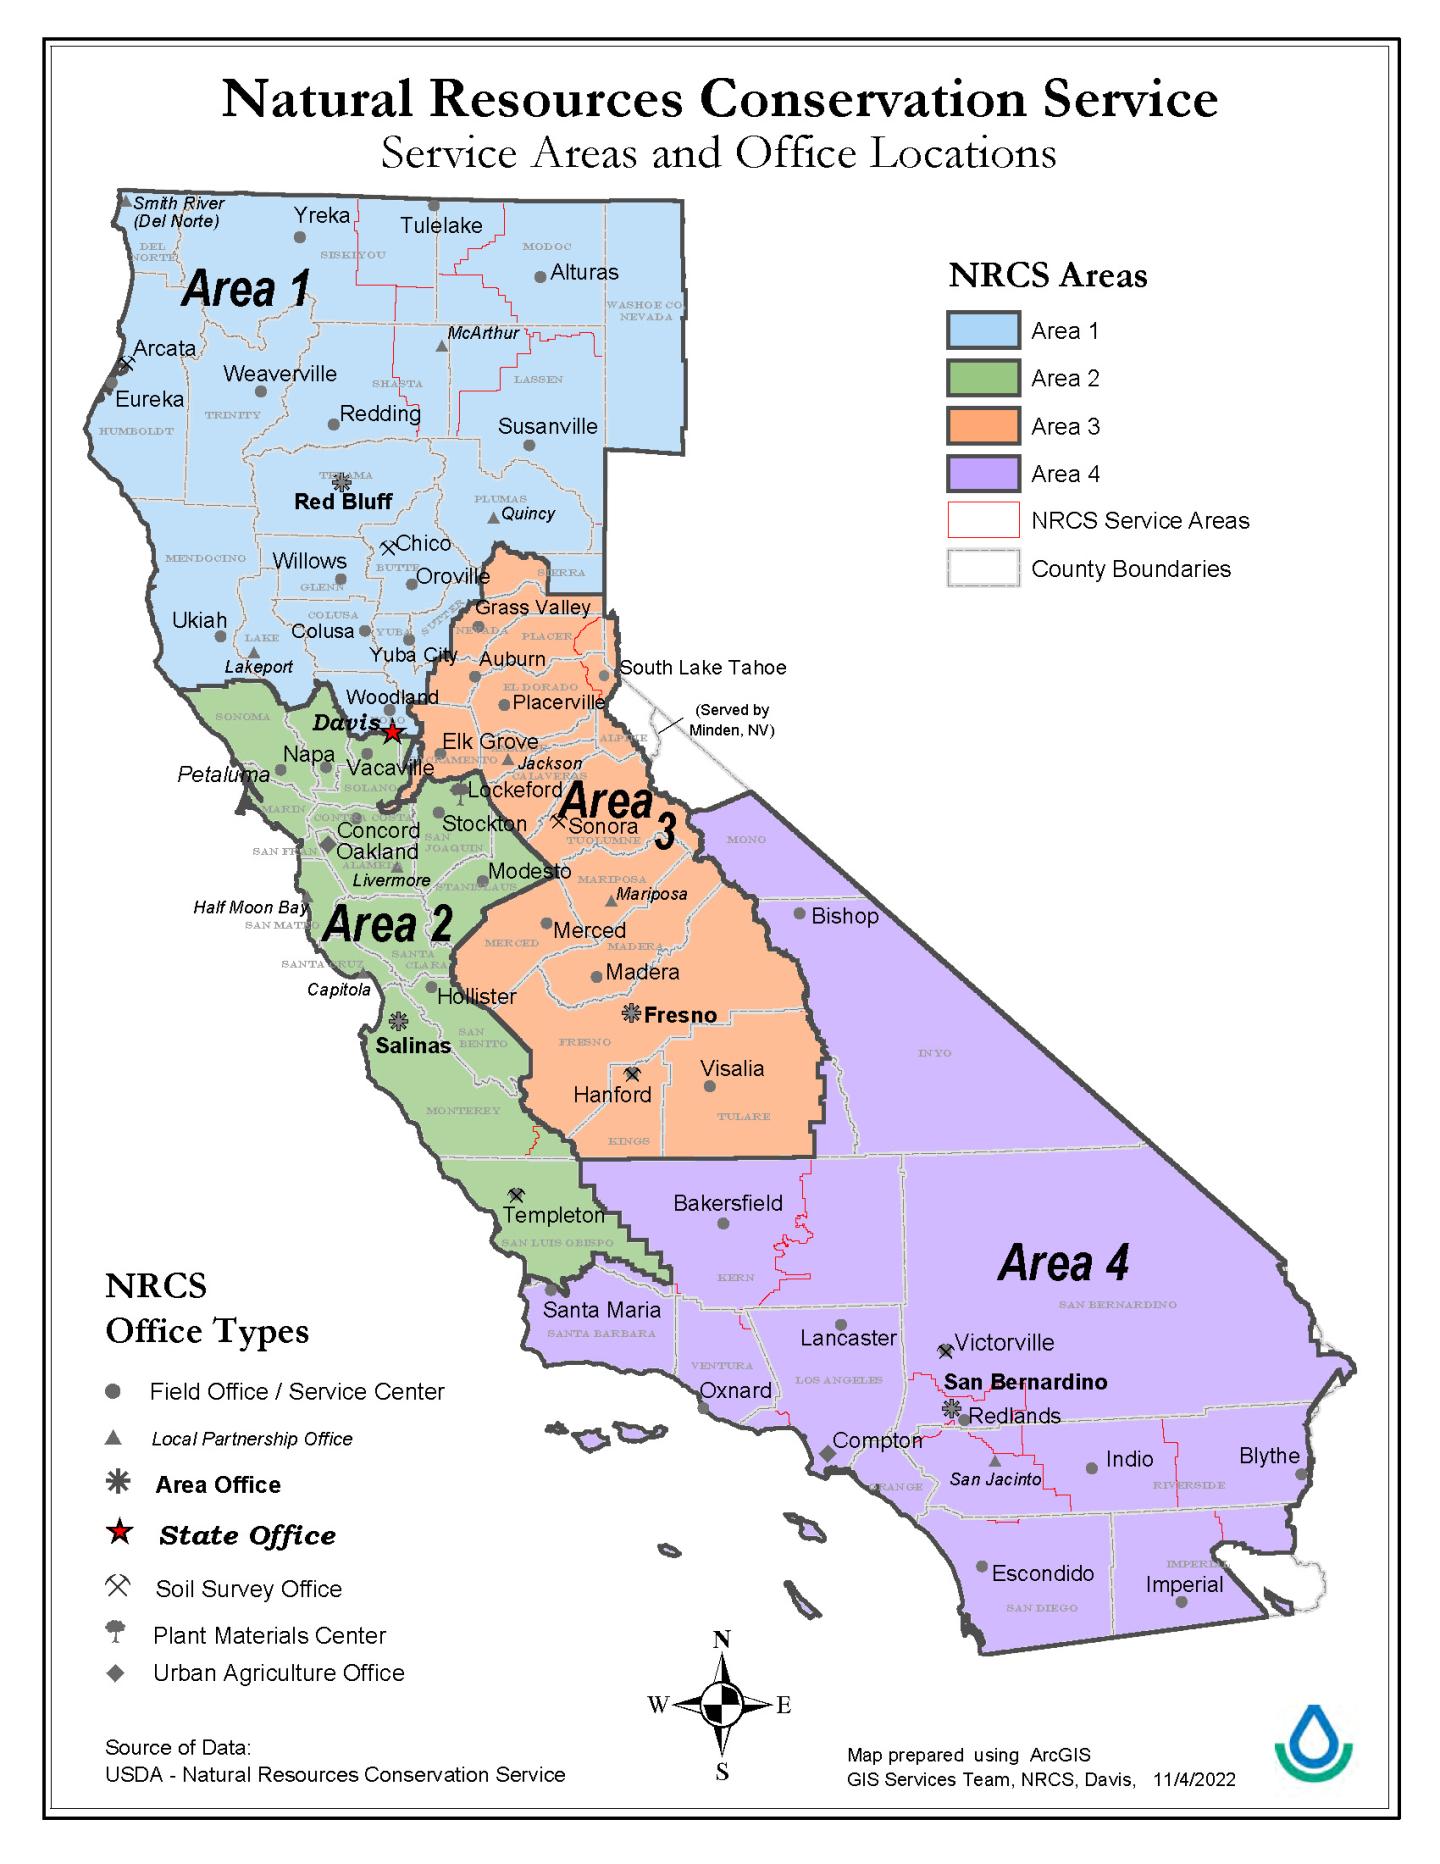 USDA-NRCS California is divided into four administrative areas with offices in each county.